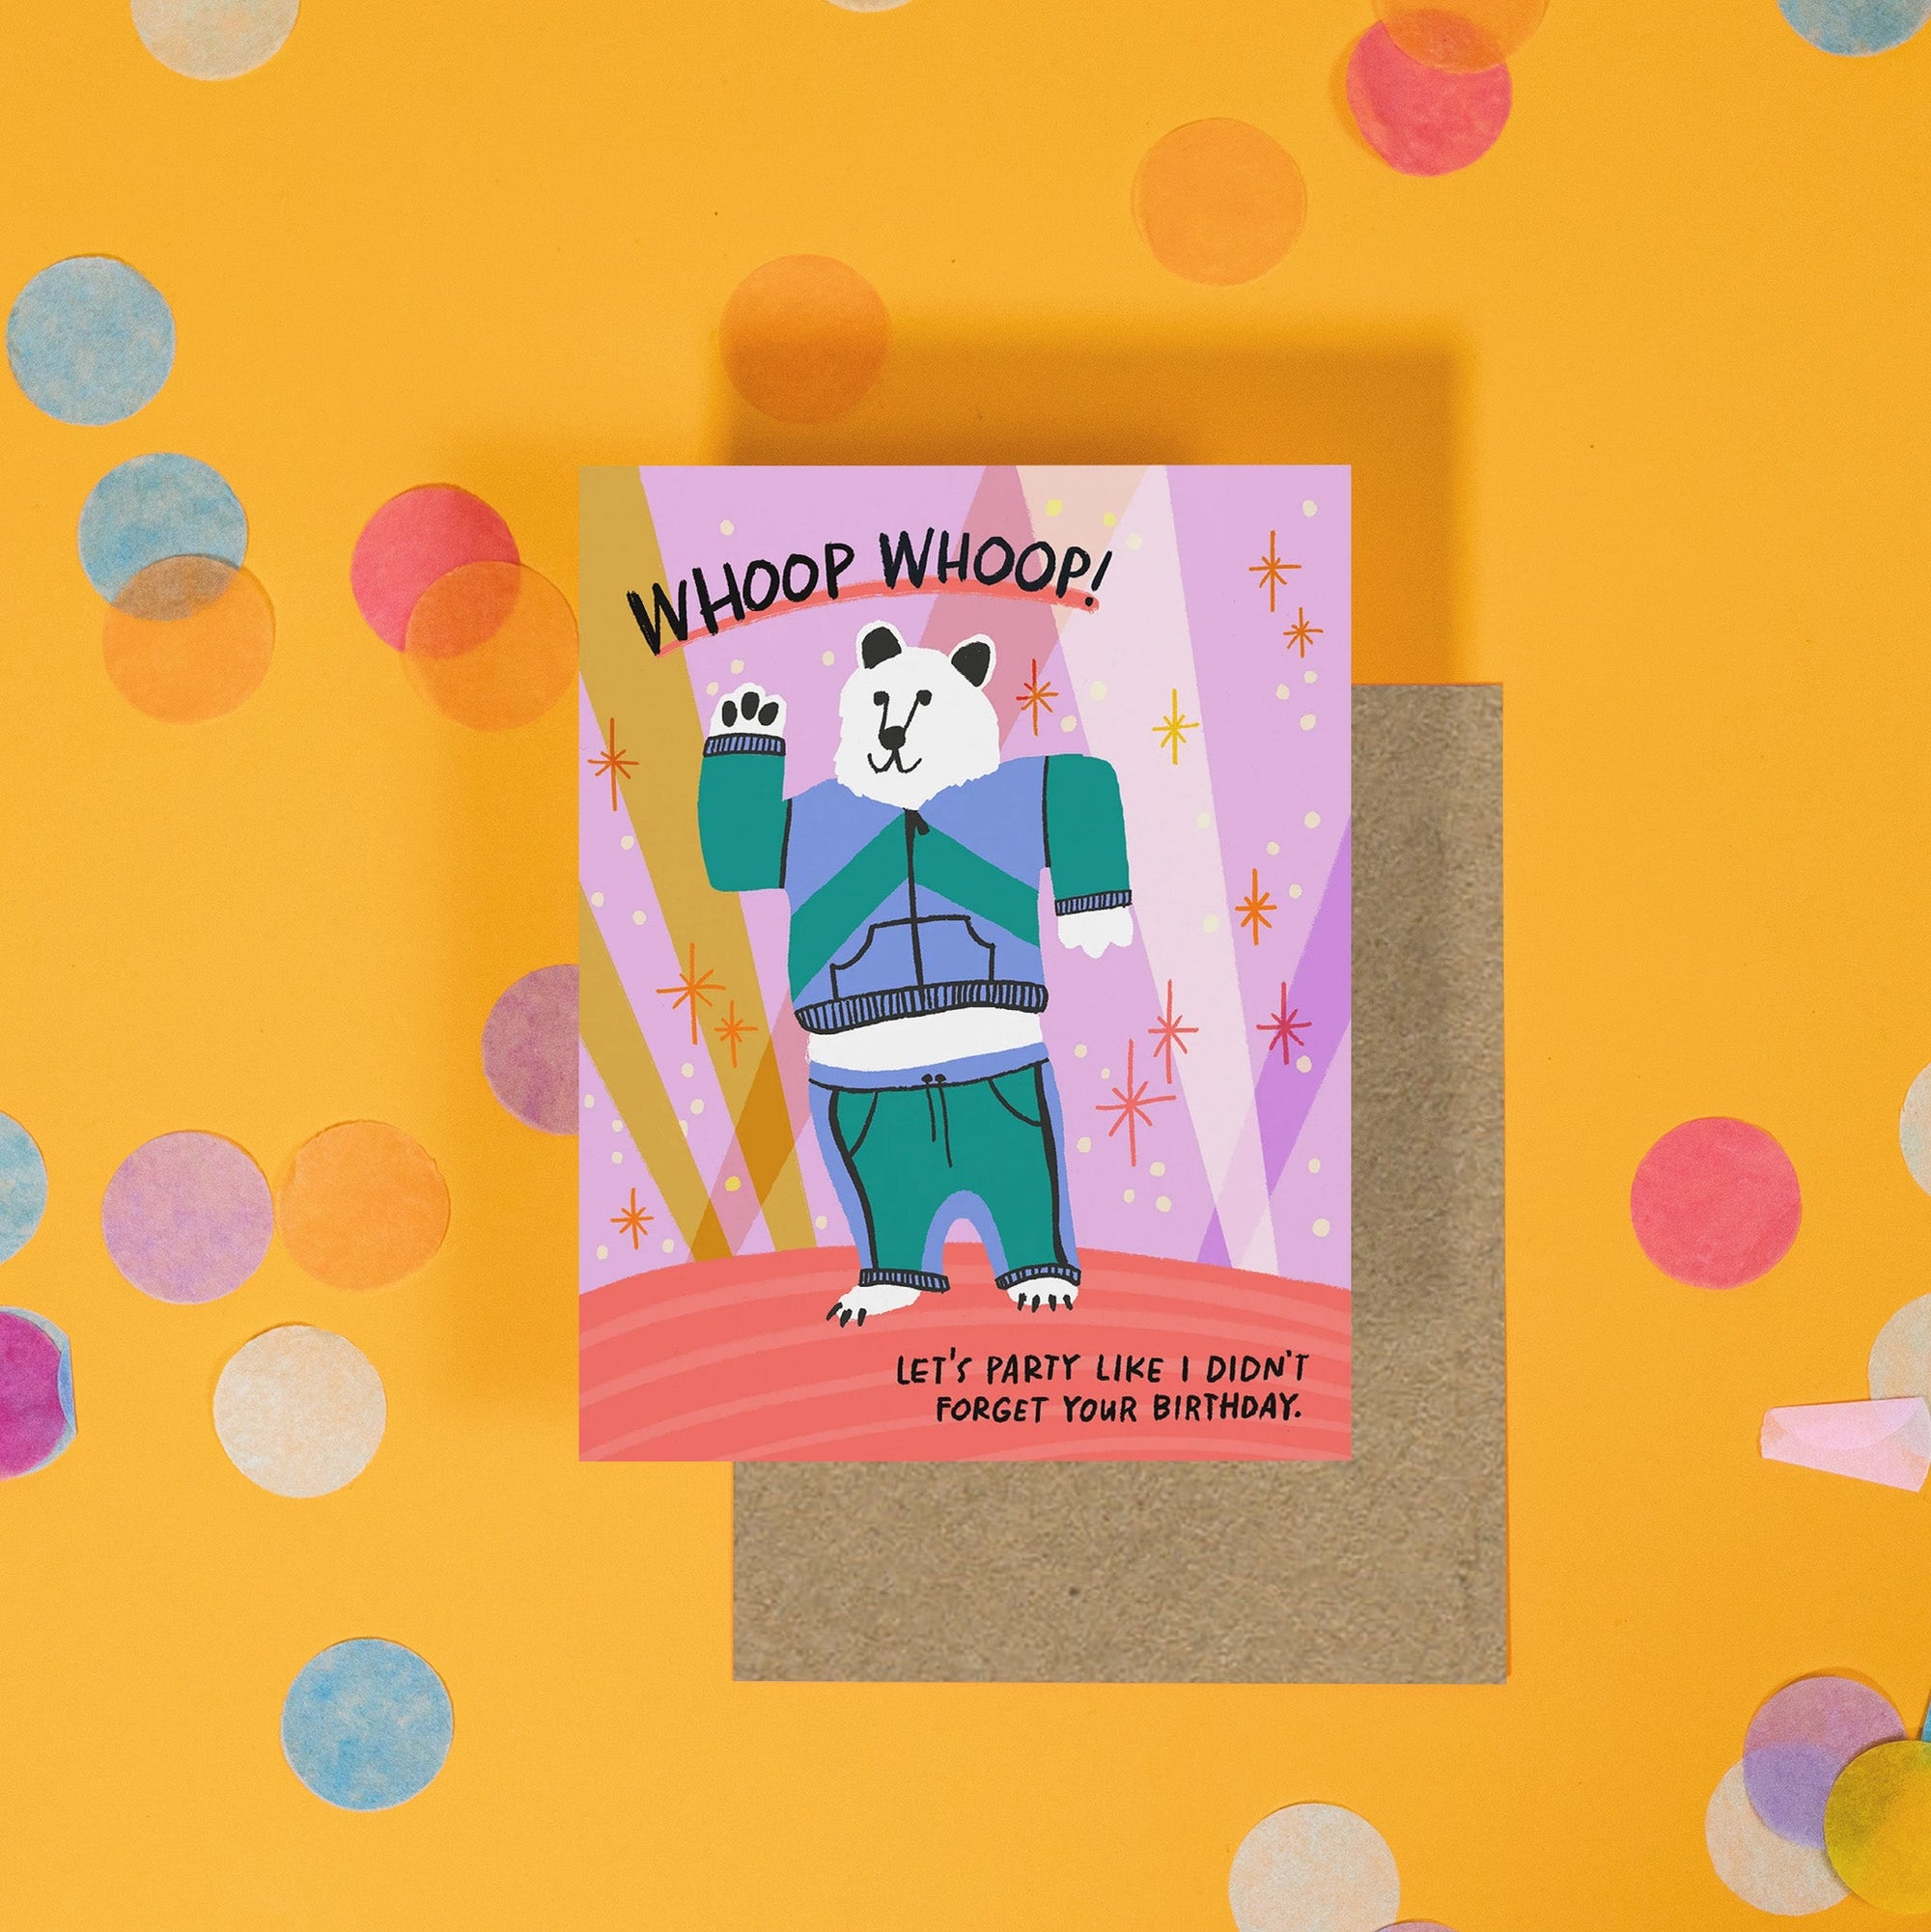 On a sunny mustard background is a greeting card and envelope with big, colorful confetti scattered around. The greeting card has an colorful illustration of a bear in a warm up suit and it says at the top "WHOOP WHOOP!" in a black, handwritten lettering. It also says "Let's party like I didn't forget your birthday." in a black, handwritten lettering. The kraft envelope sits under the card. 